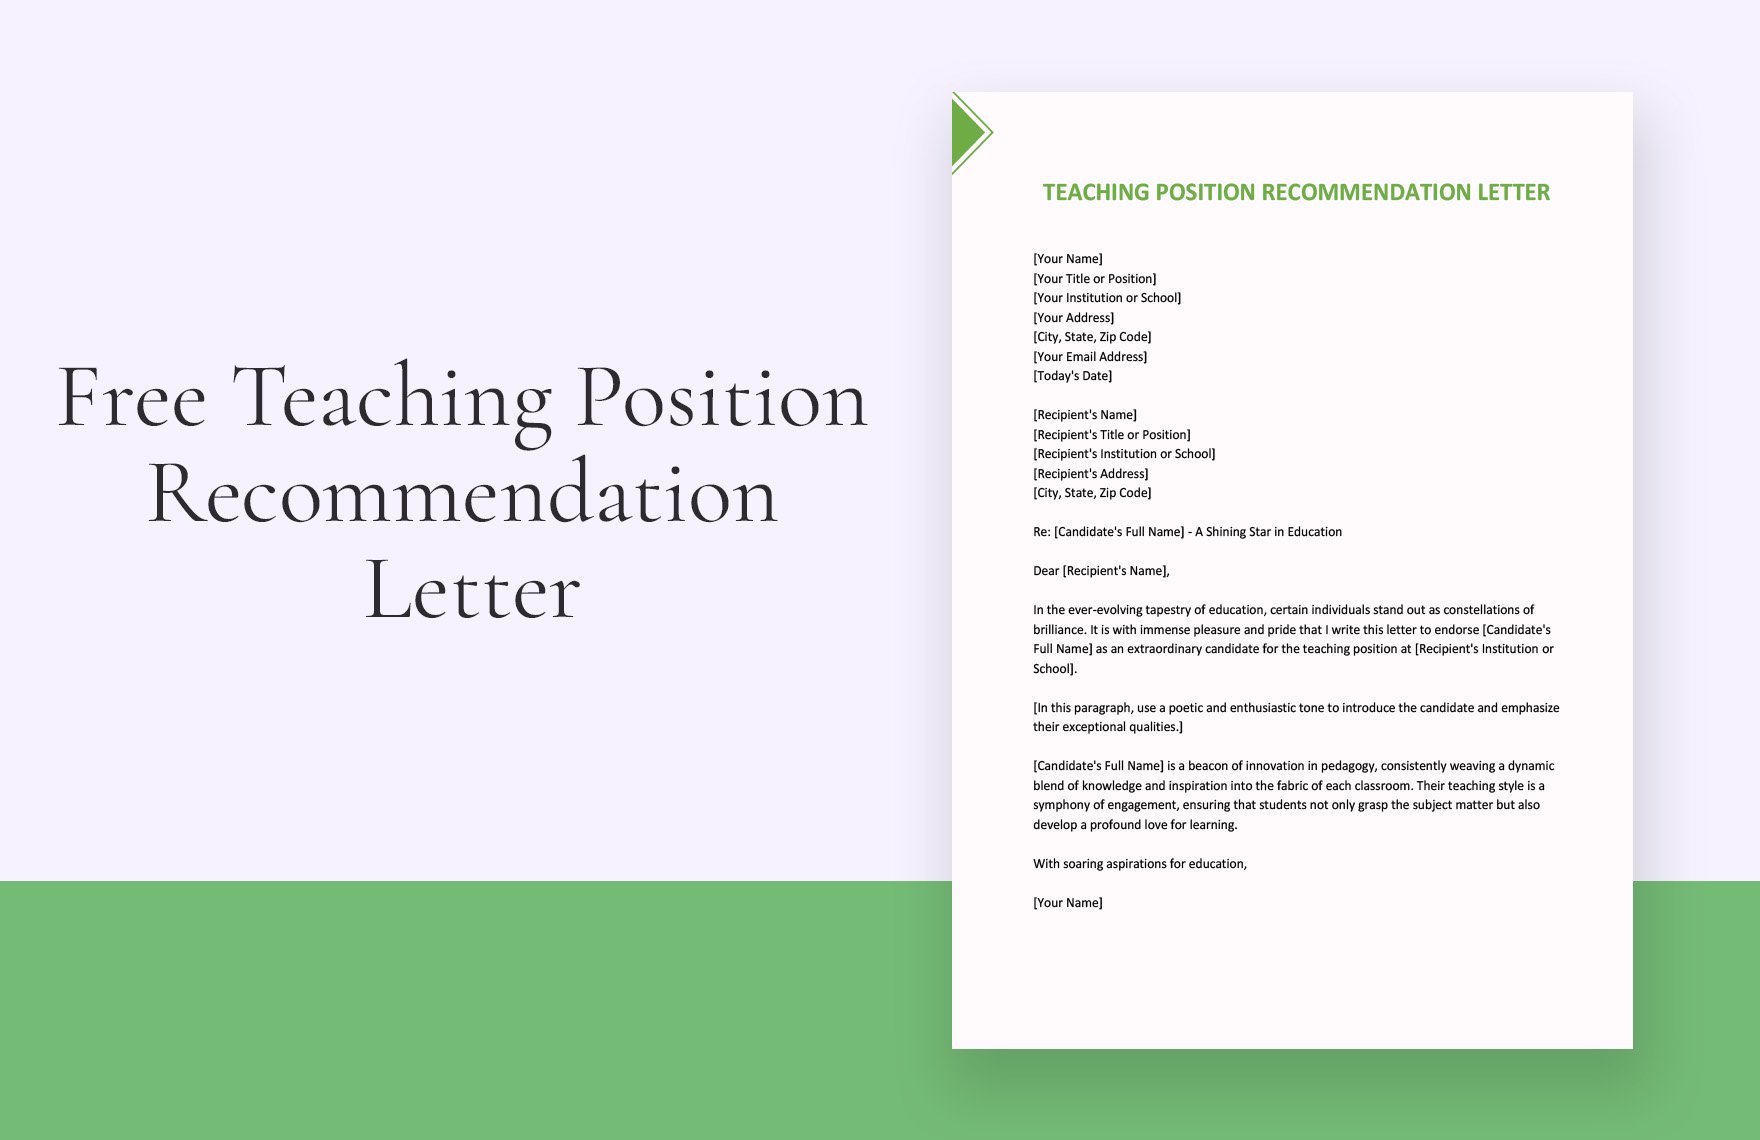 Teaching Position Recommendation Letter in Word, Google Docs